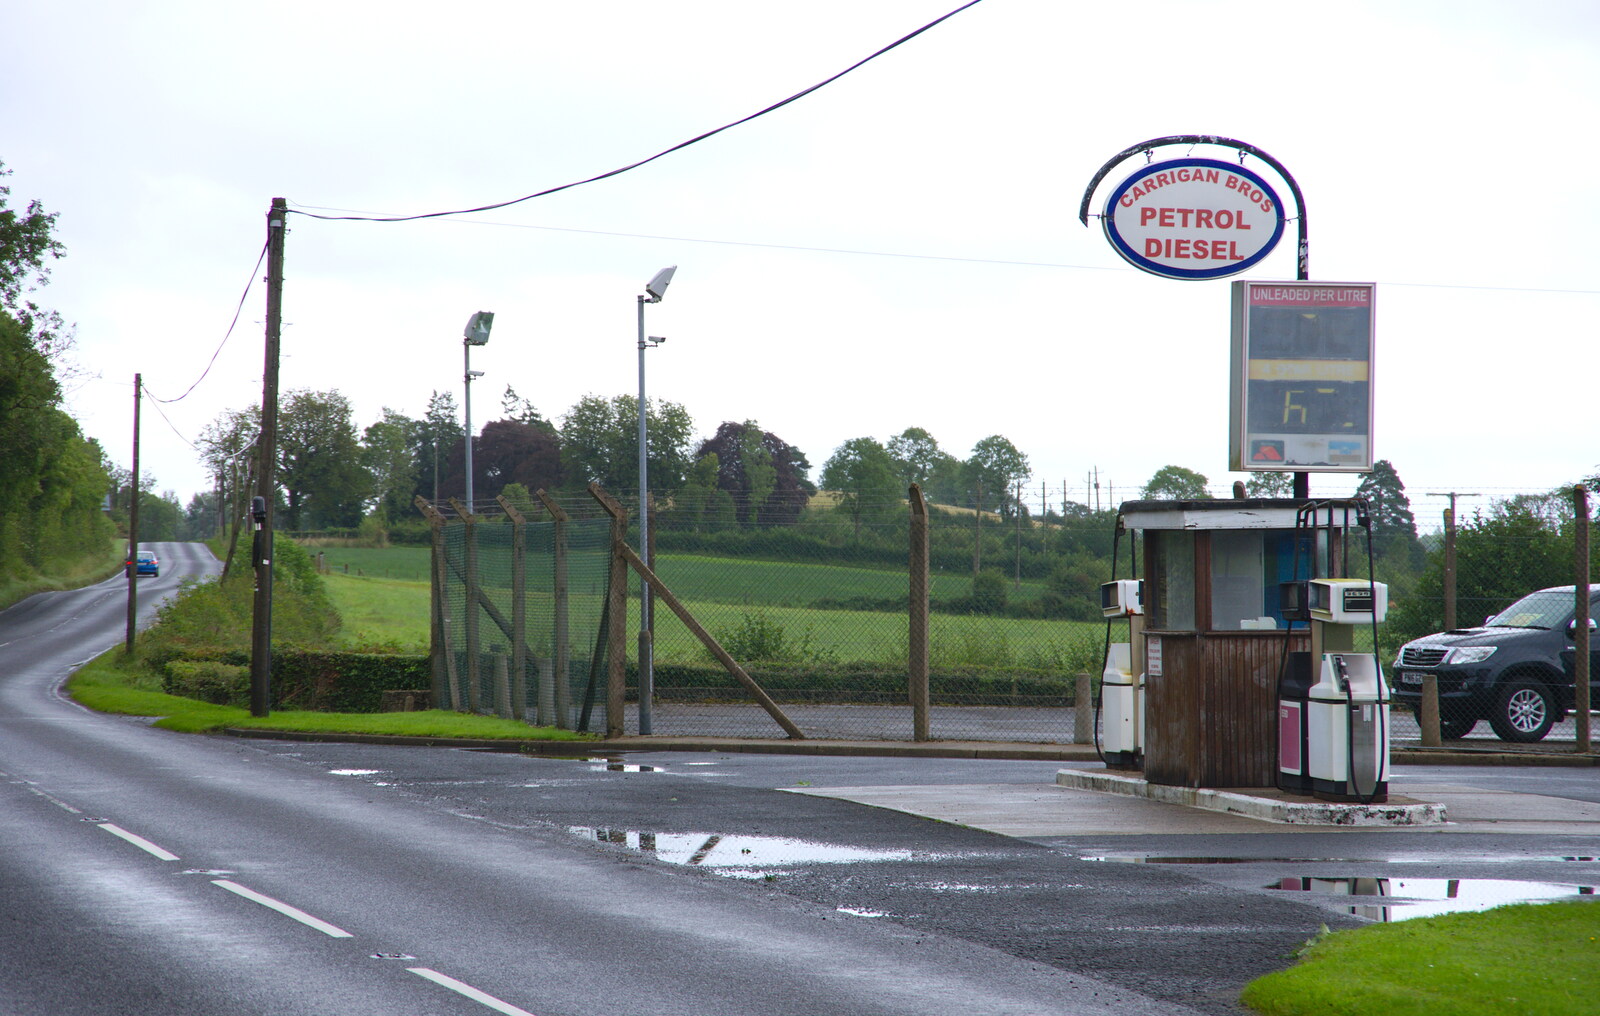 The derelict petrol station at Carrigan Brothers from Travels in the Borderlands: An Blaic/Blacklion to Belcoo and back, Cavan and Fermanagh, Ireland - 22nd August 2019